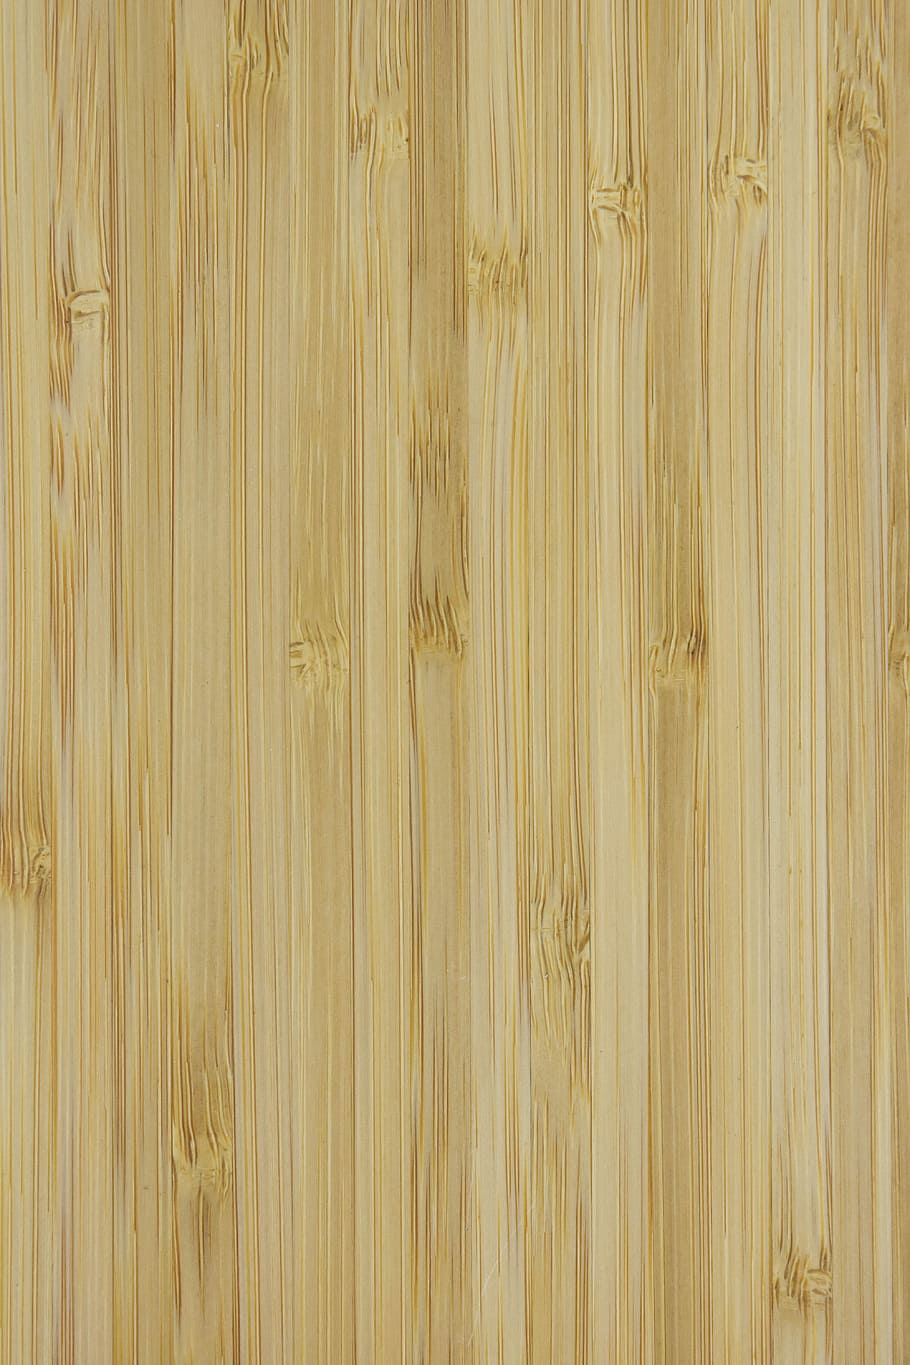 the background, wood, wooden, retro, texture, boards, pattern, HD wallpaper